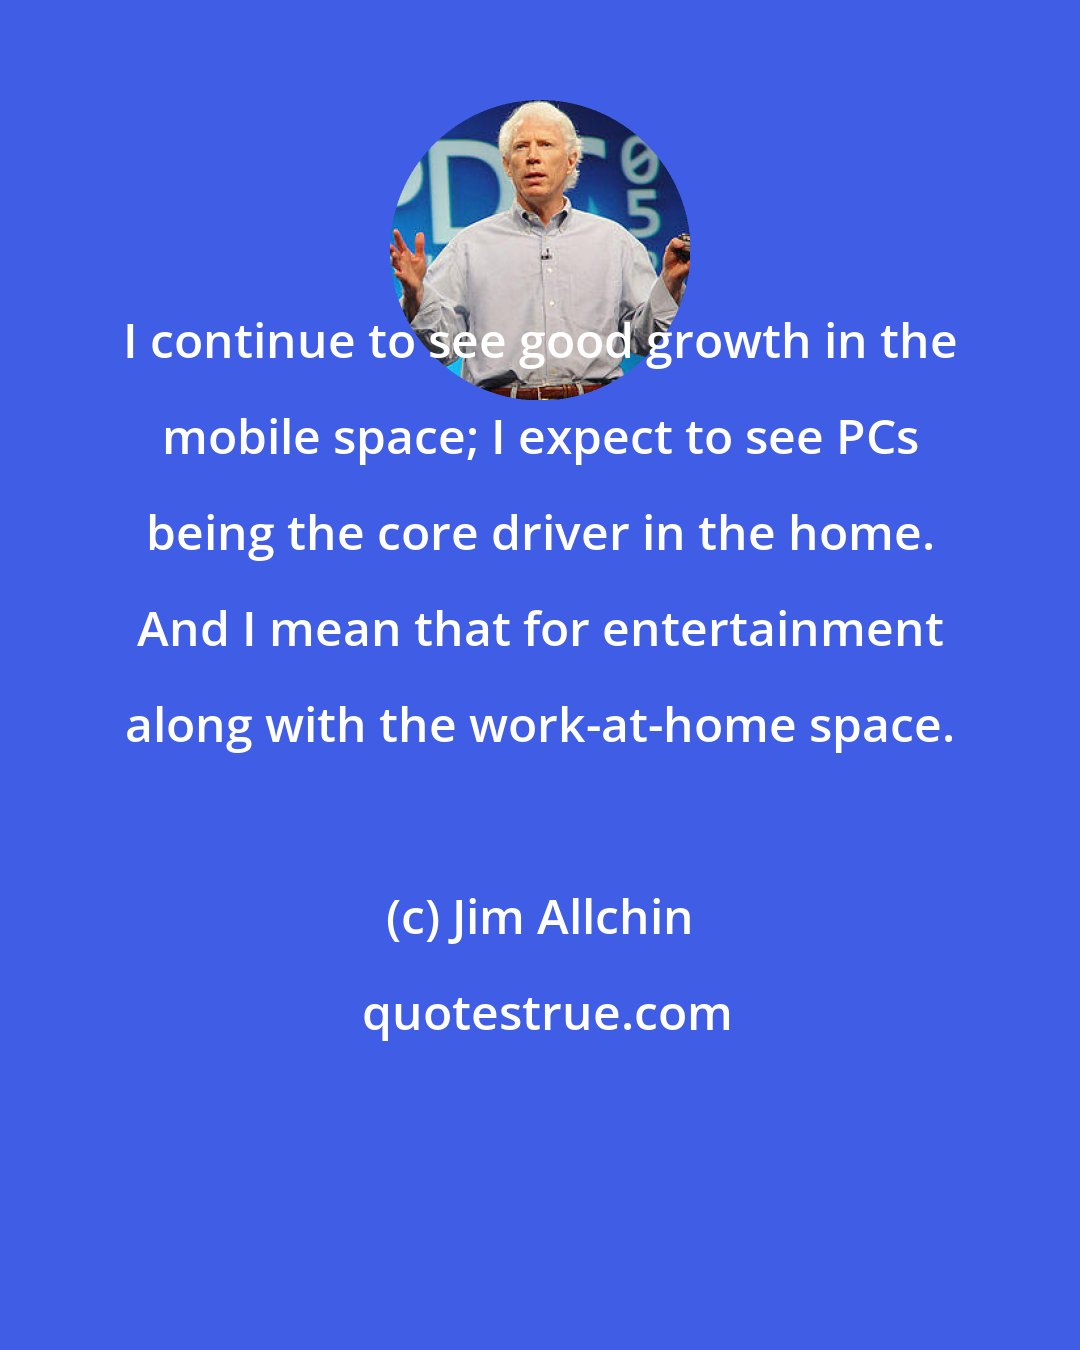 Jim Allchin: I continue to see good growth in the mobile space; I expect to see PCs being the core driver in the home. And I mean that for entertainment along with the work-at-home space.